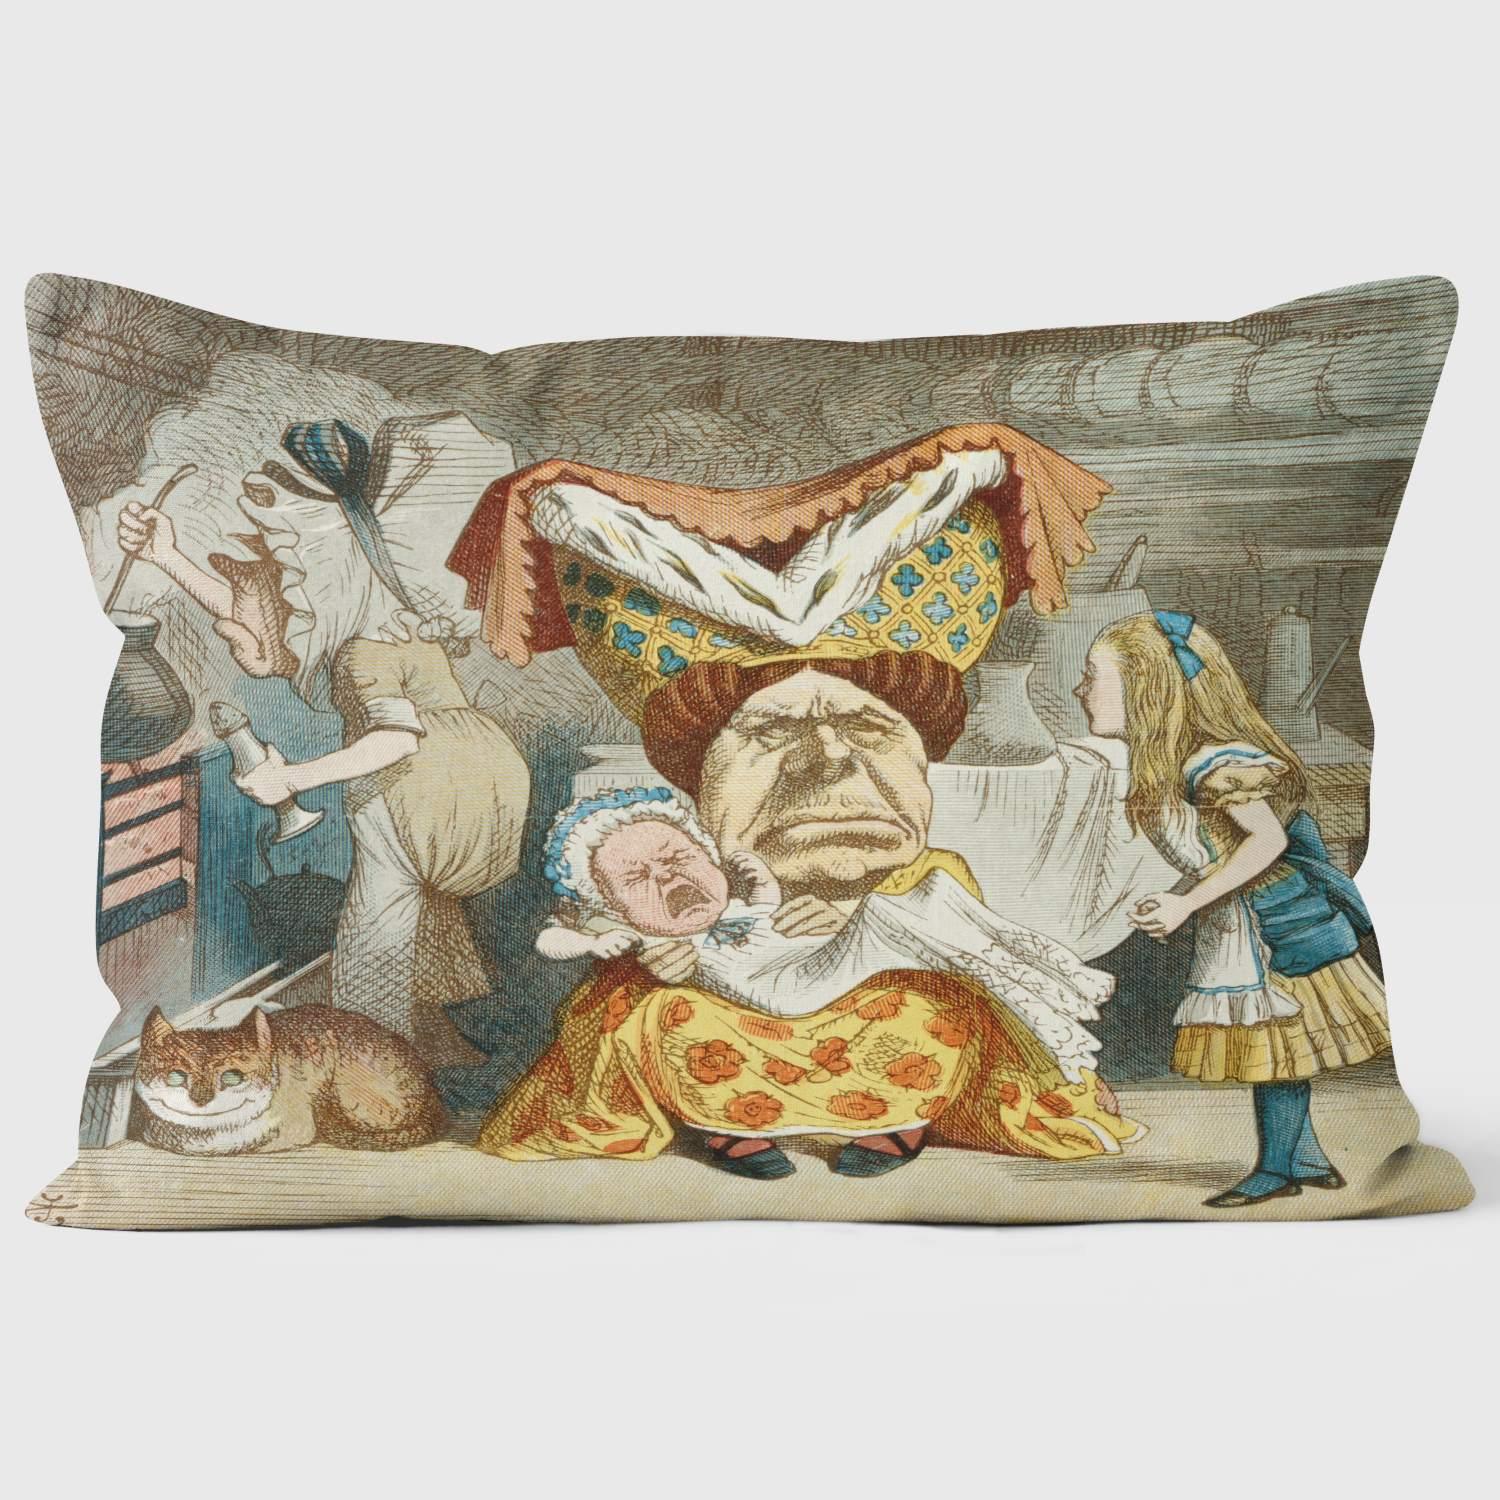 Duchess With The Baby - Alice in Wonderland - Lewis Carroll Cushion - Handmade Cushions UK - WeLoveCushions